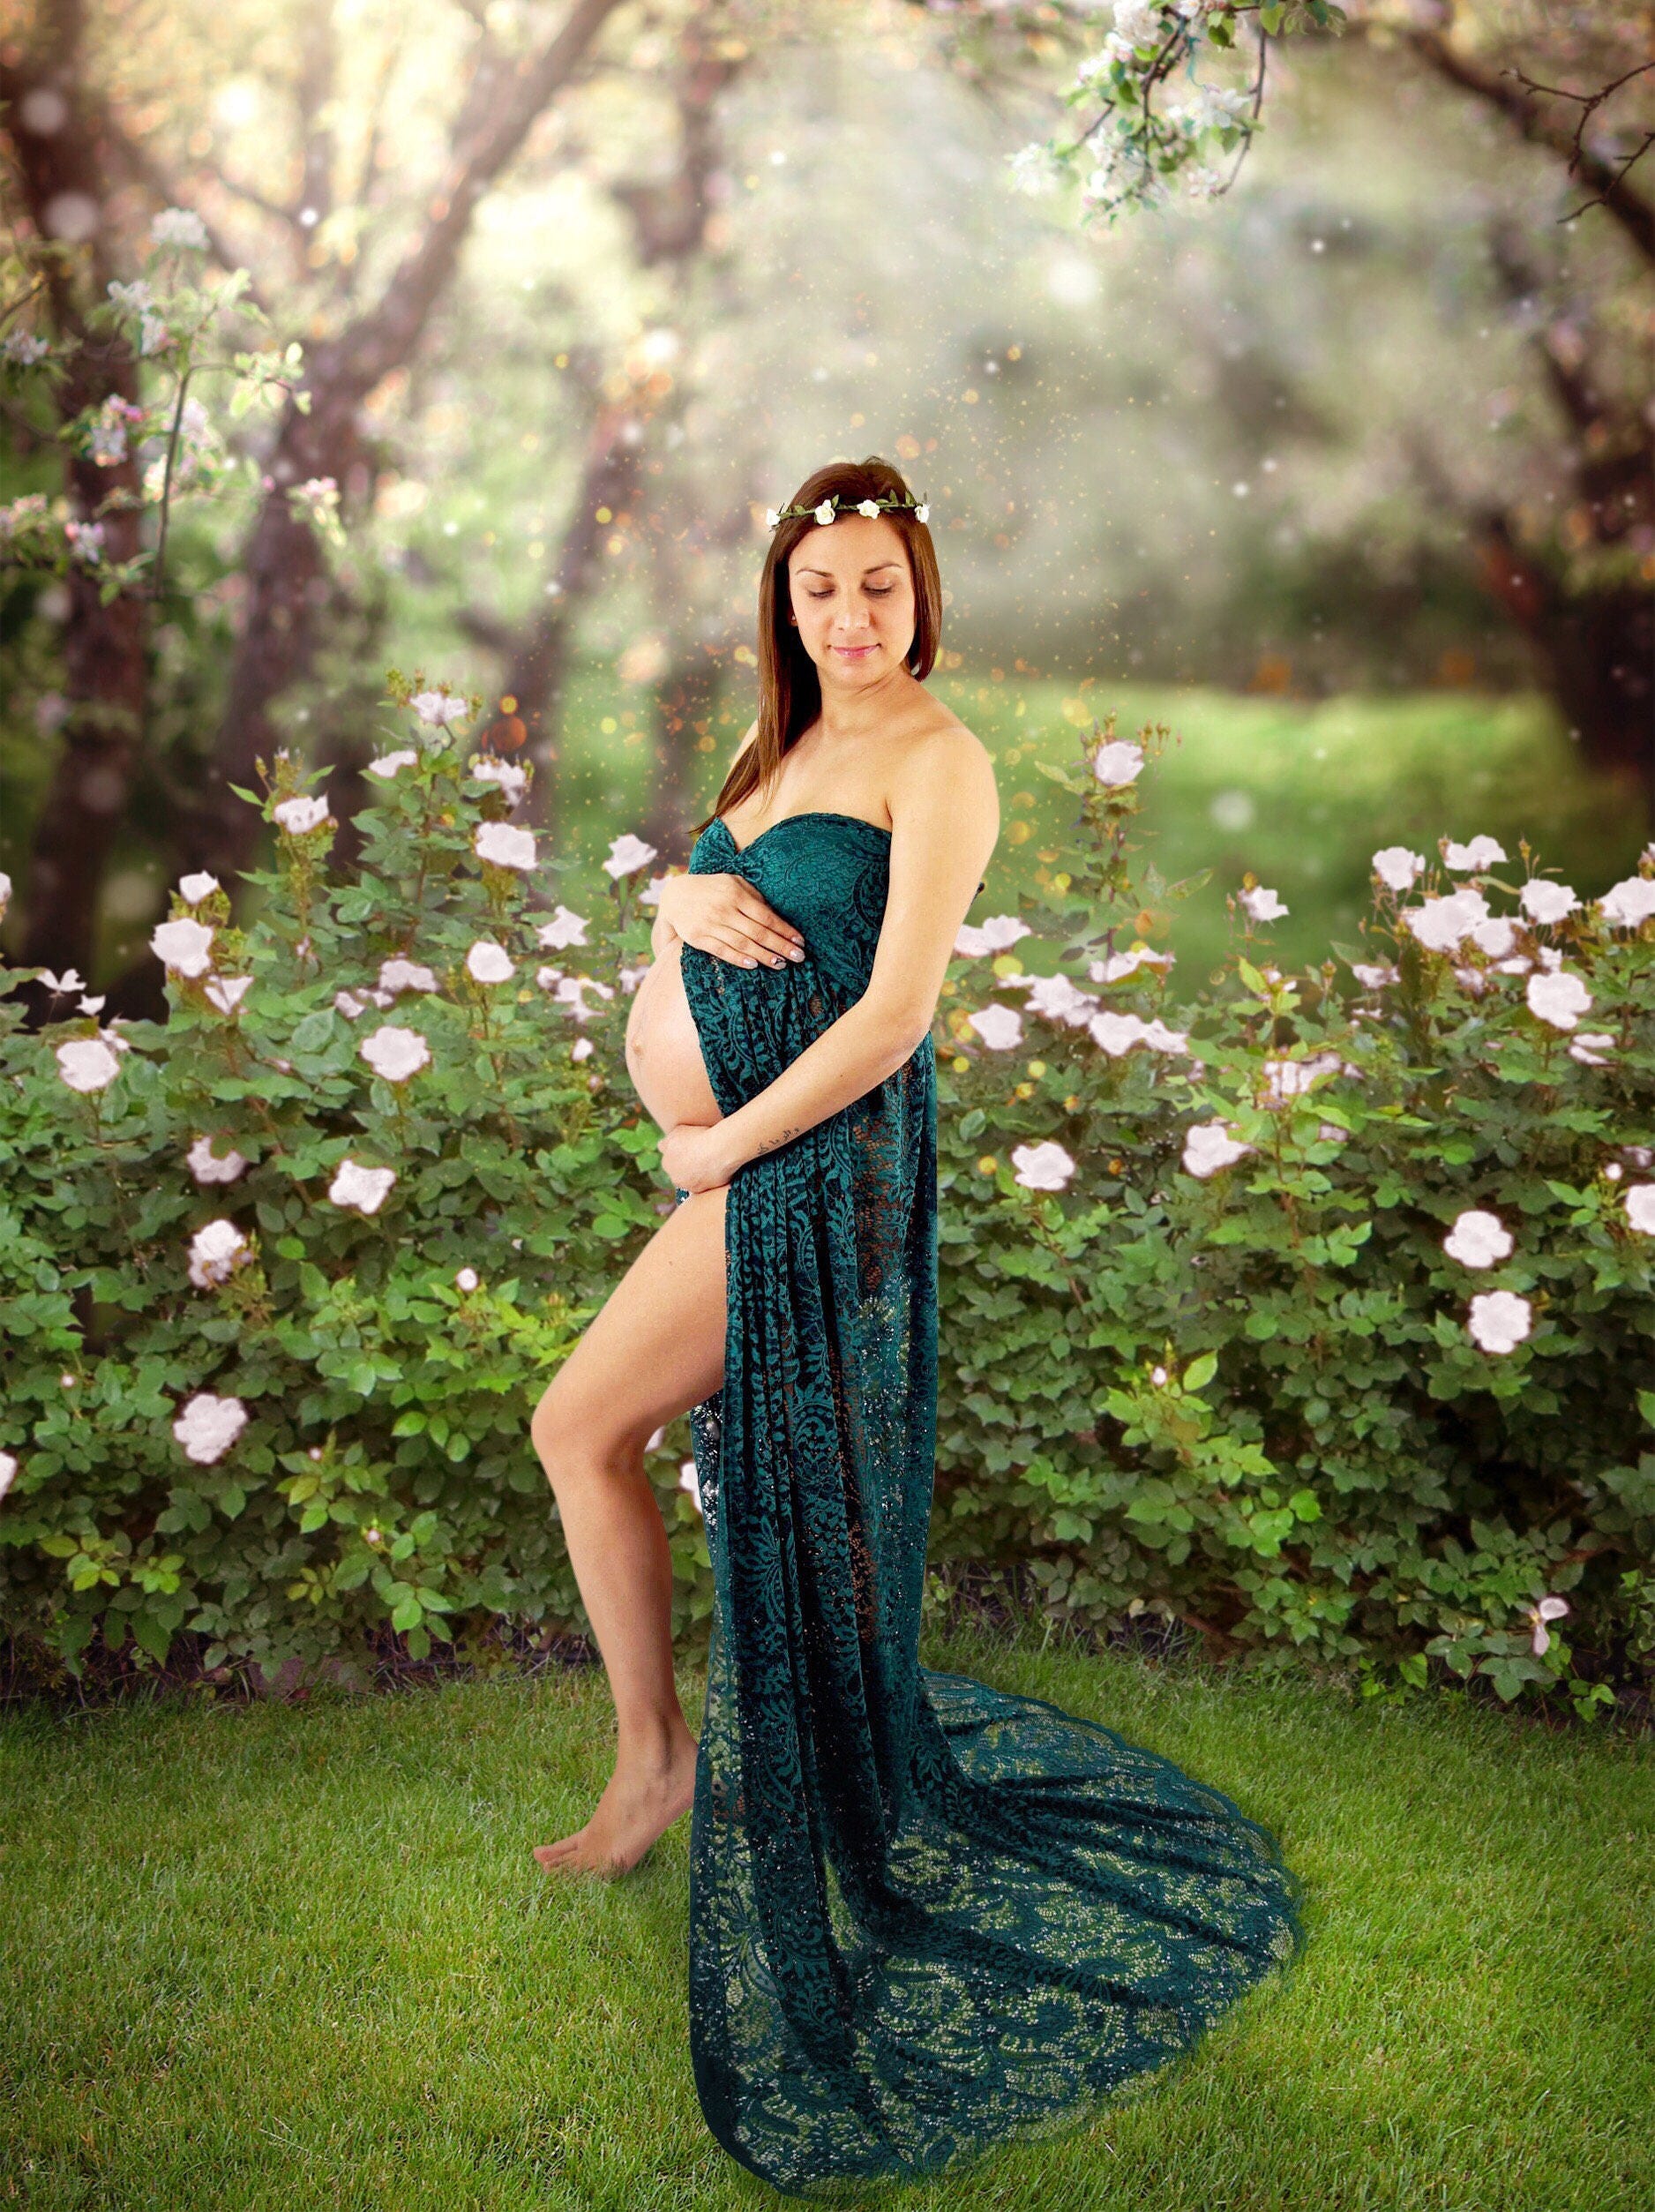 Maternity gown photo shoot / Maternity Dress Photo Props